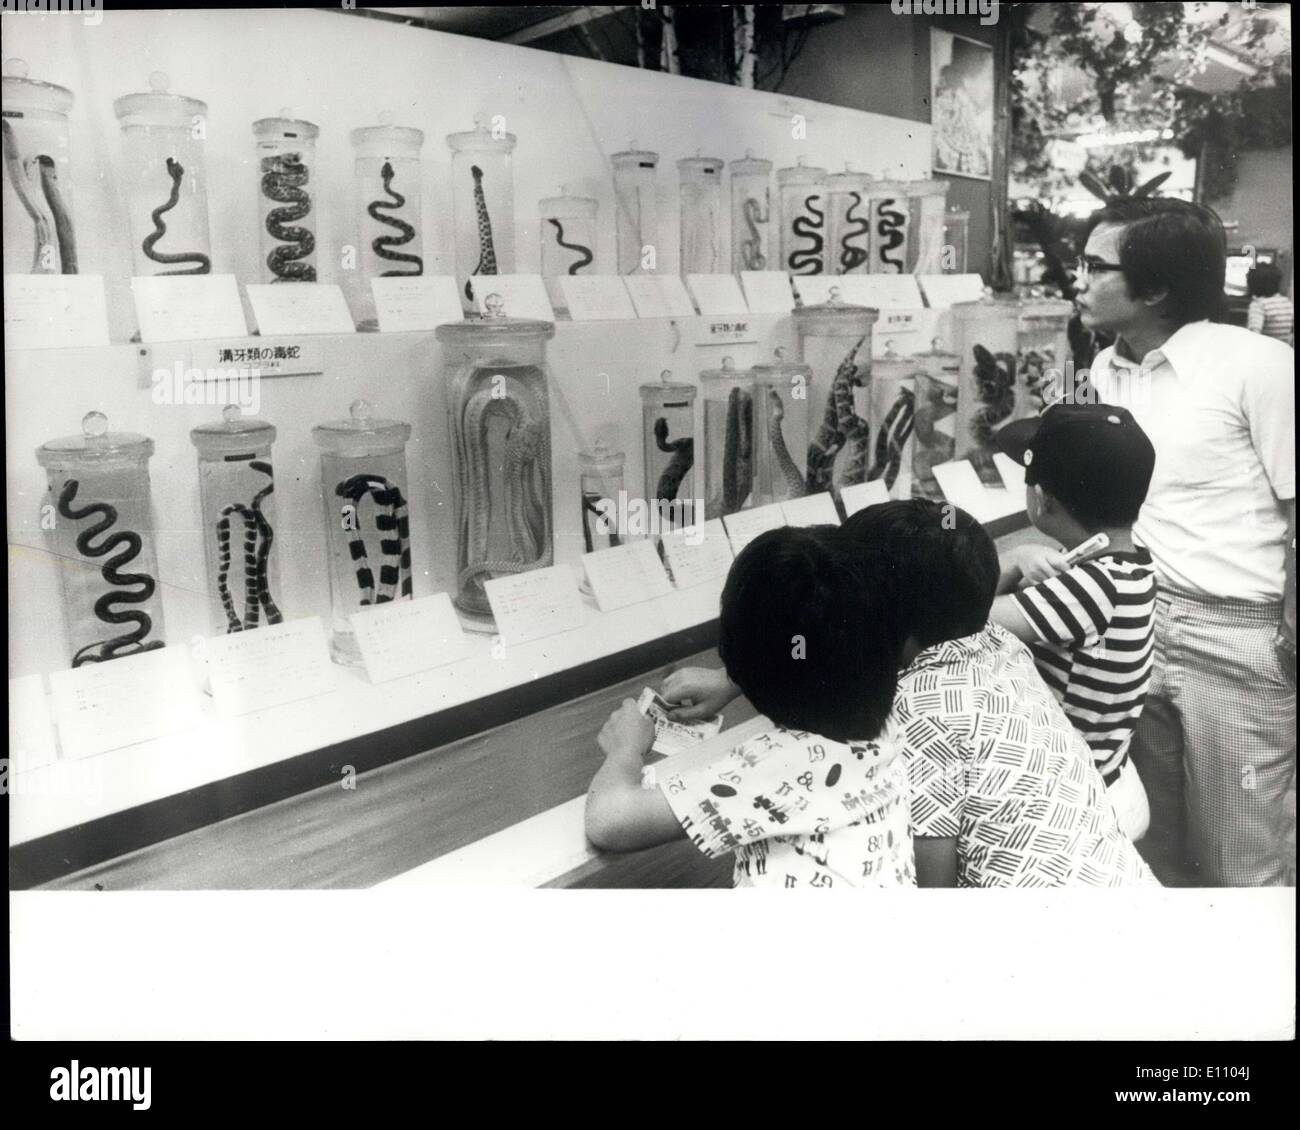 Sep. 10, 1974 - A SNAKE SHOW IN A DEPARTMENT STORE IN TOKYO: Over 2,000 snakes from all parts of the world are being exhibited at a Tokyo department store as an added attraction. Most of the snakes are venomous, some capable of killing a man, or a large animal, such as a horse, in minutes with its poison. Apart from the specimen snakes in bottles, live pythons and boa-constrictors are part of the exhibition separated from the public by plate-glass cages. Stock Photo